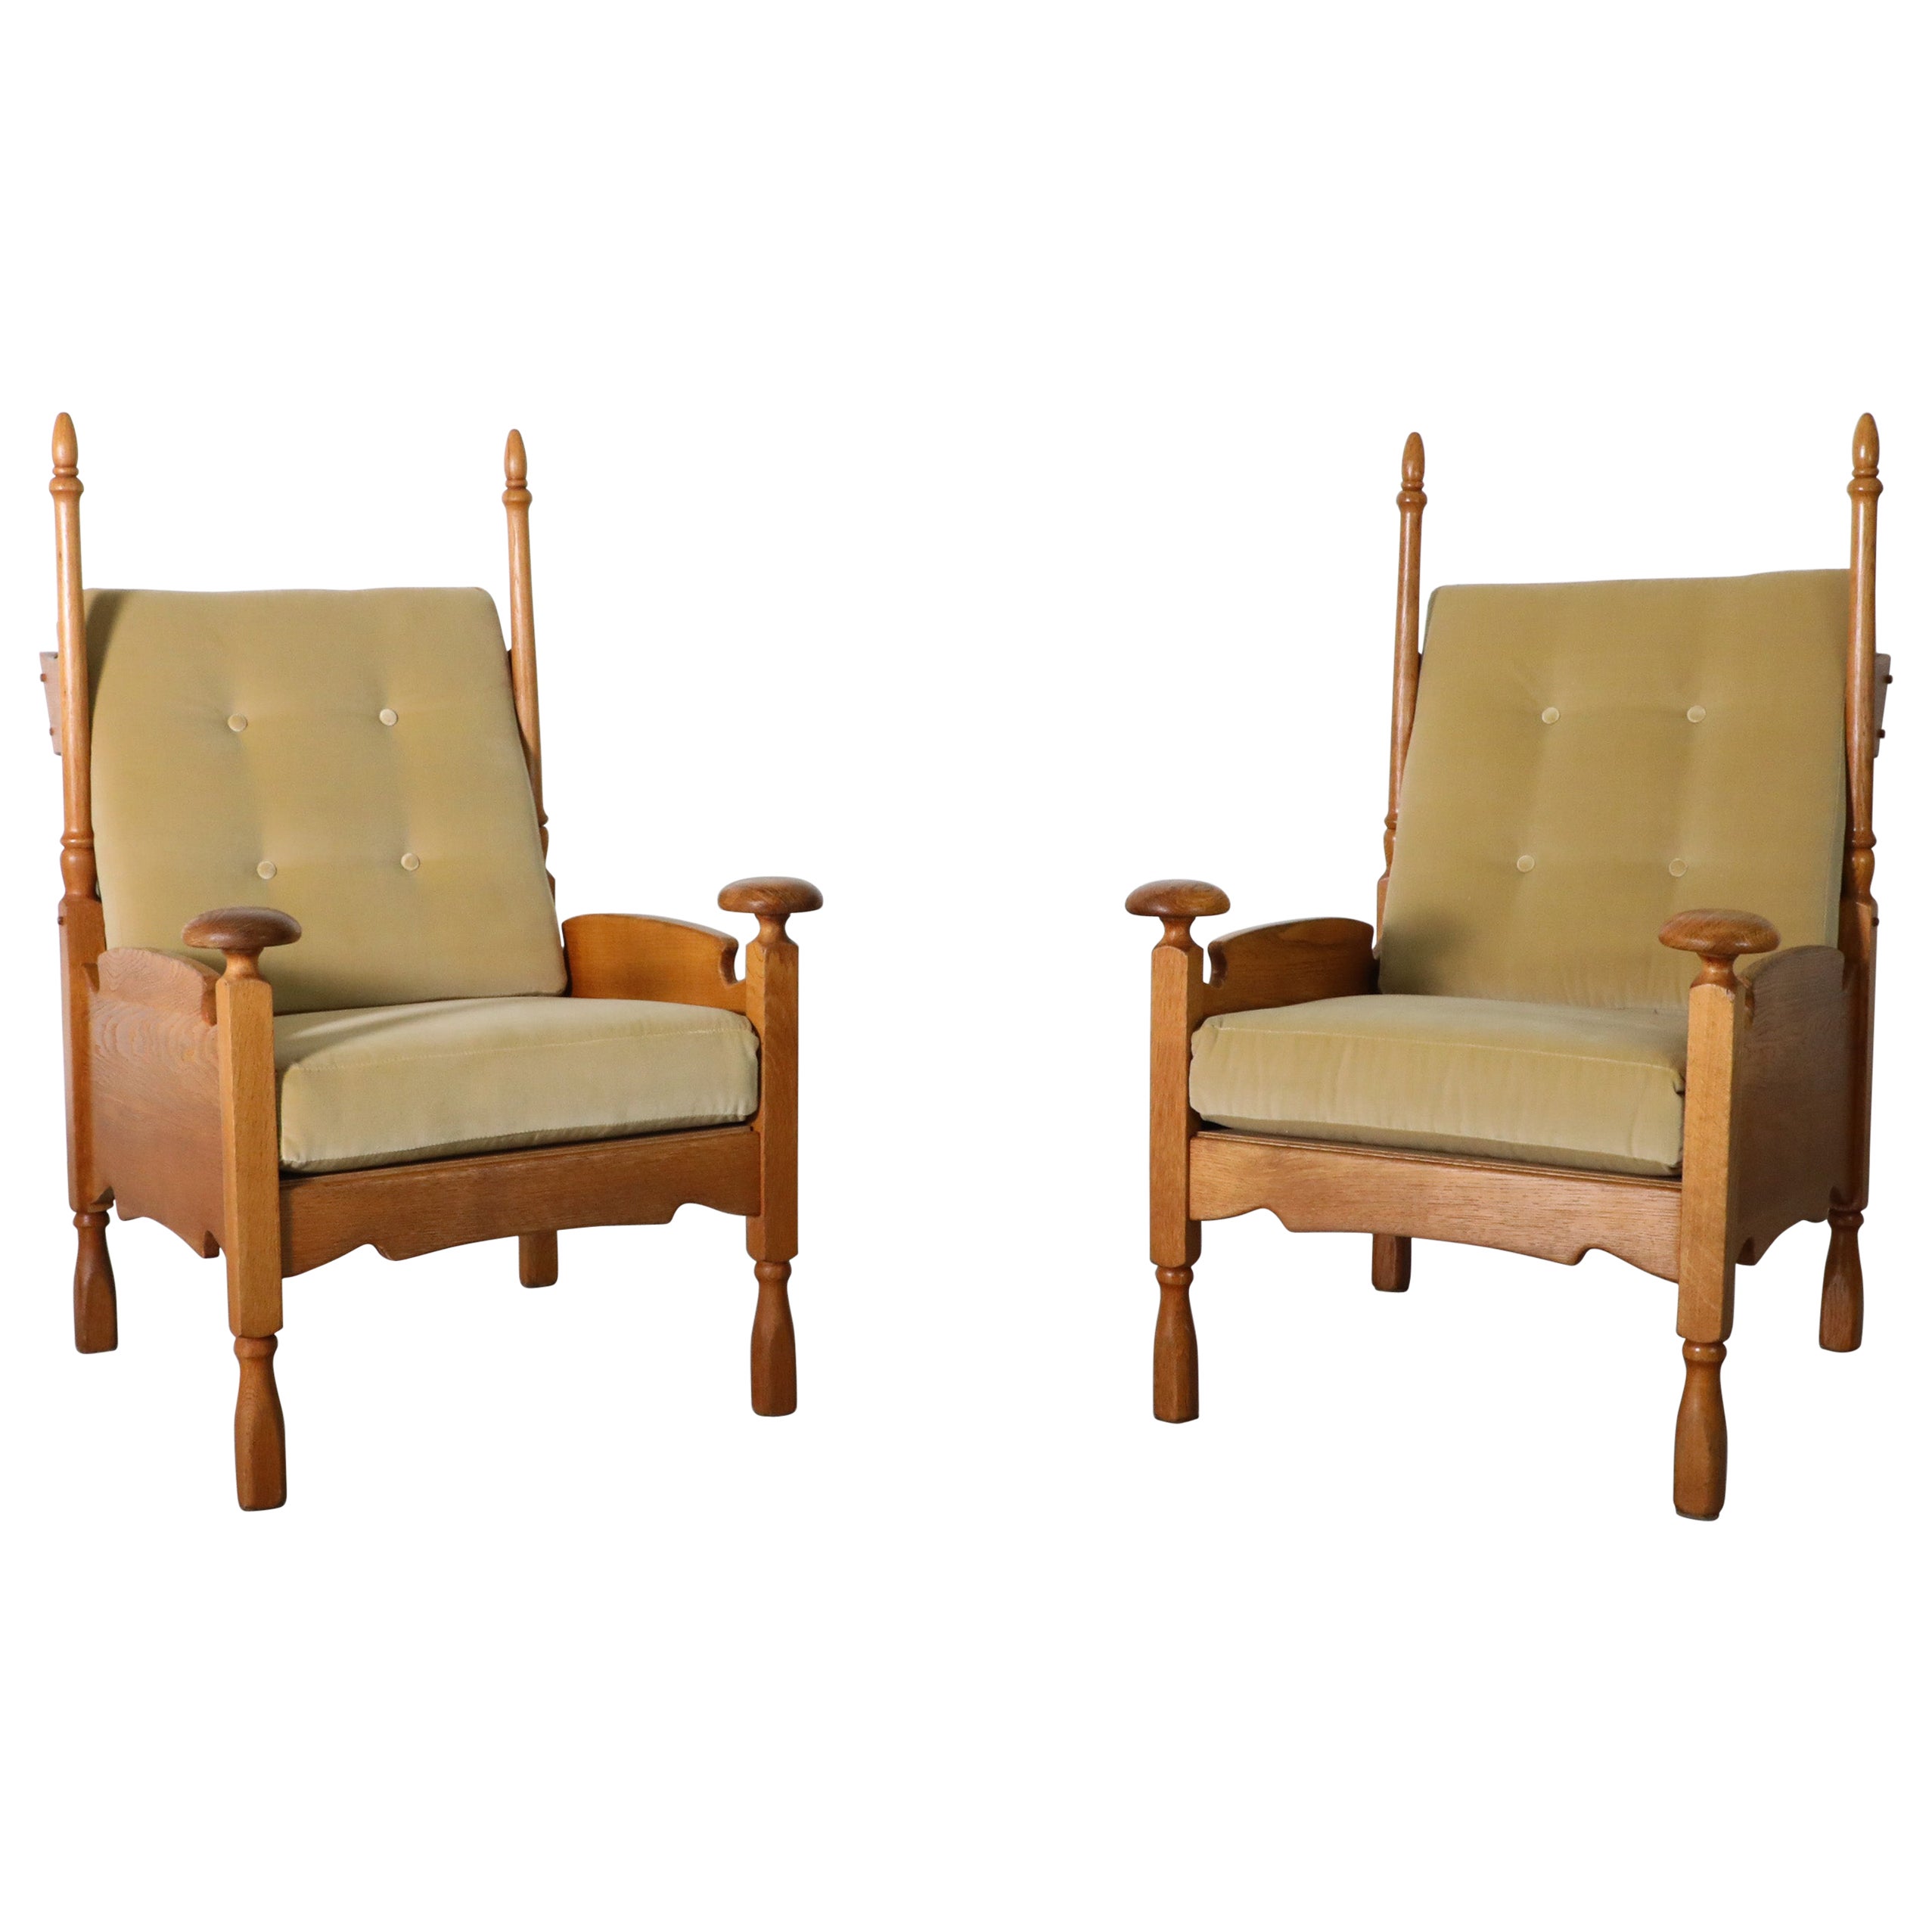 Pair Of Oak And Velvet Throne-Like Lounge Chairs with Finials & Horn Shaped Rods